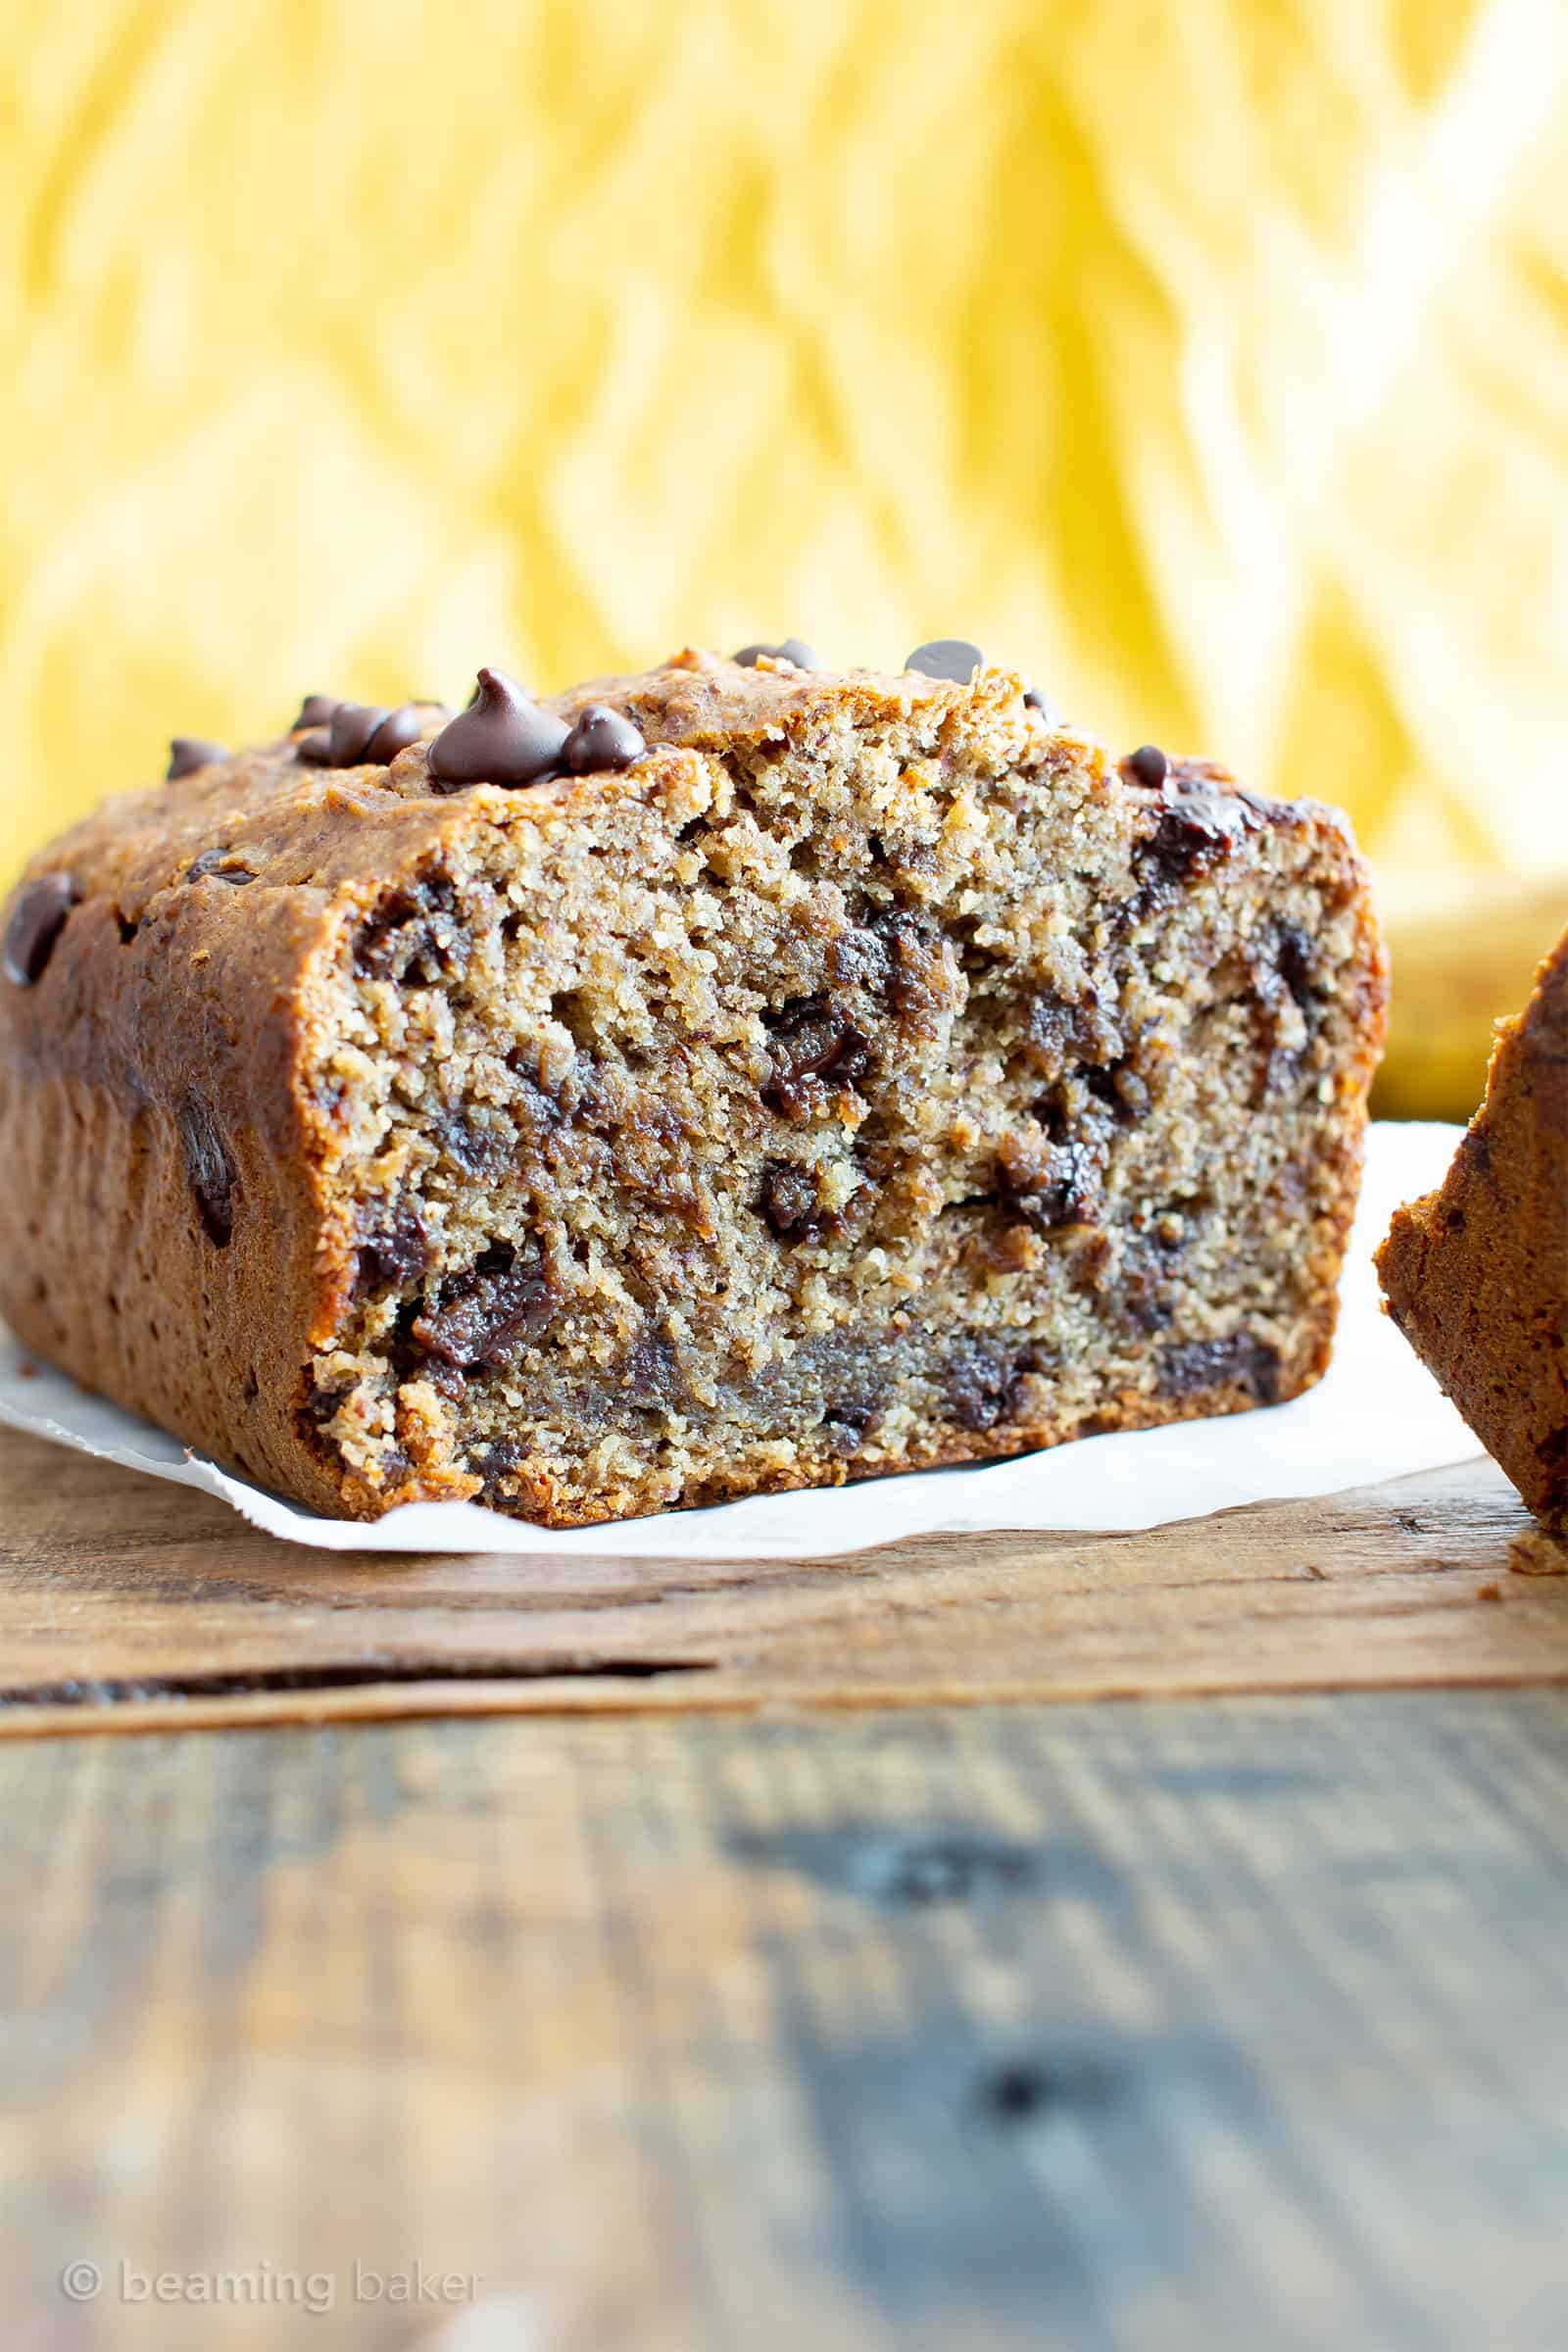 Best Moist Chocolate Chip Banana Bread Recipe (V, GF): a one bowl recipe for deliciously moist banana bread bursting with chocolate and made with healthy, whole ingredients. #Vegan #GlutenFree #DairyFree #Healthy #QuickBreads | Recipe at BeamingBaker.com